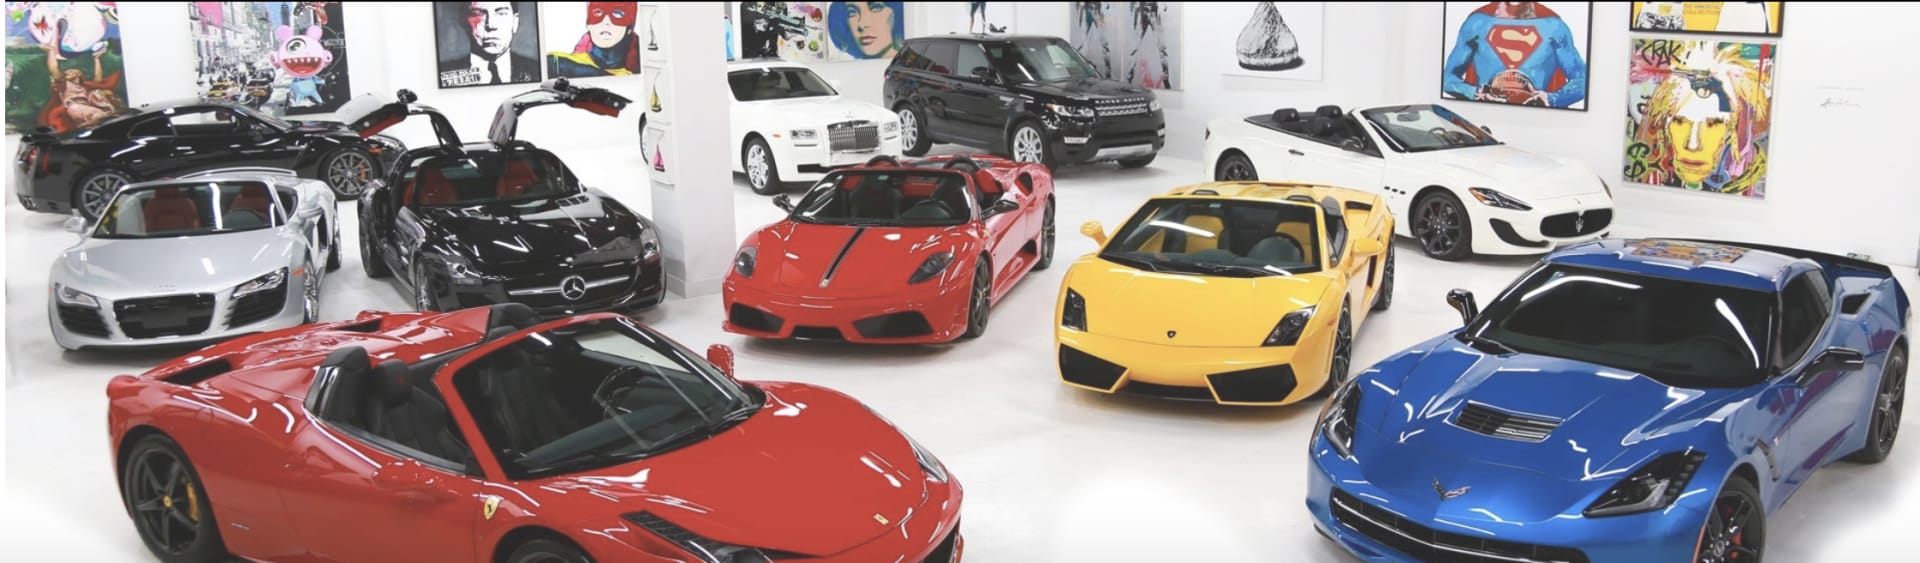 Upscale Car Clubs Provide Luxury Storage and a Collector’s Lifestyle